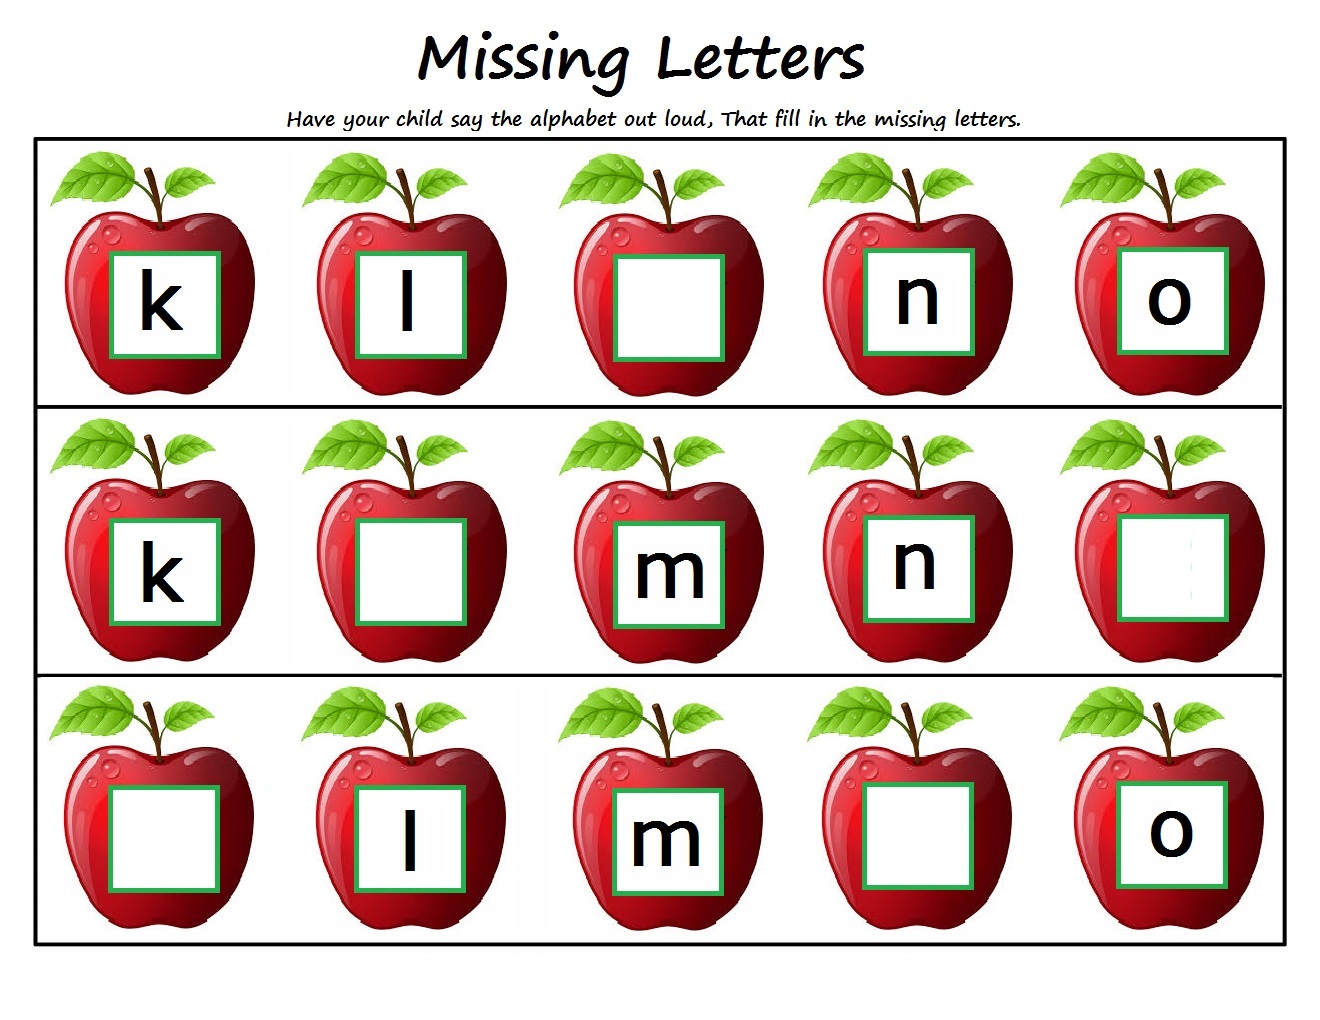 Kindergarten Worksheets: Kindergarten Worksheets - Missing Letters